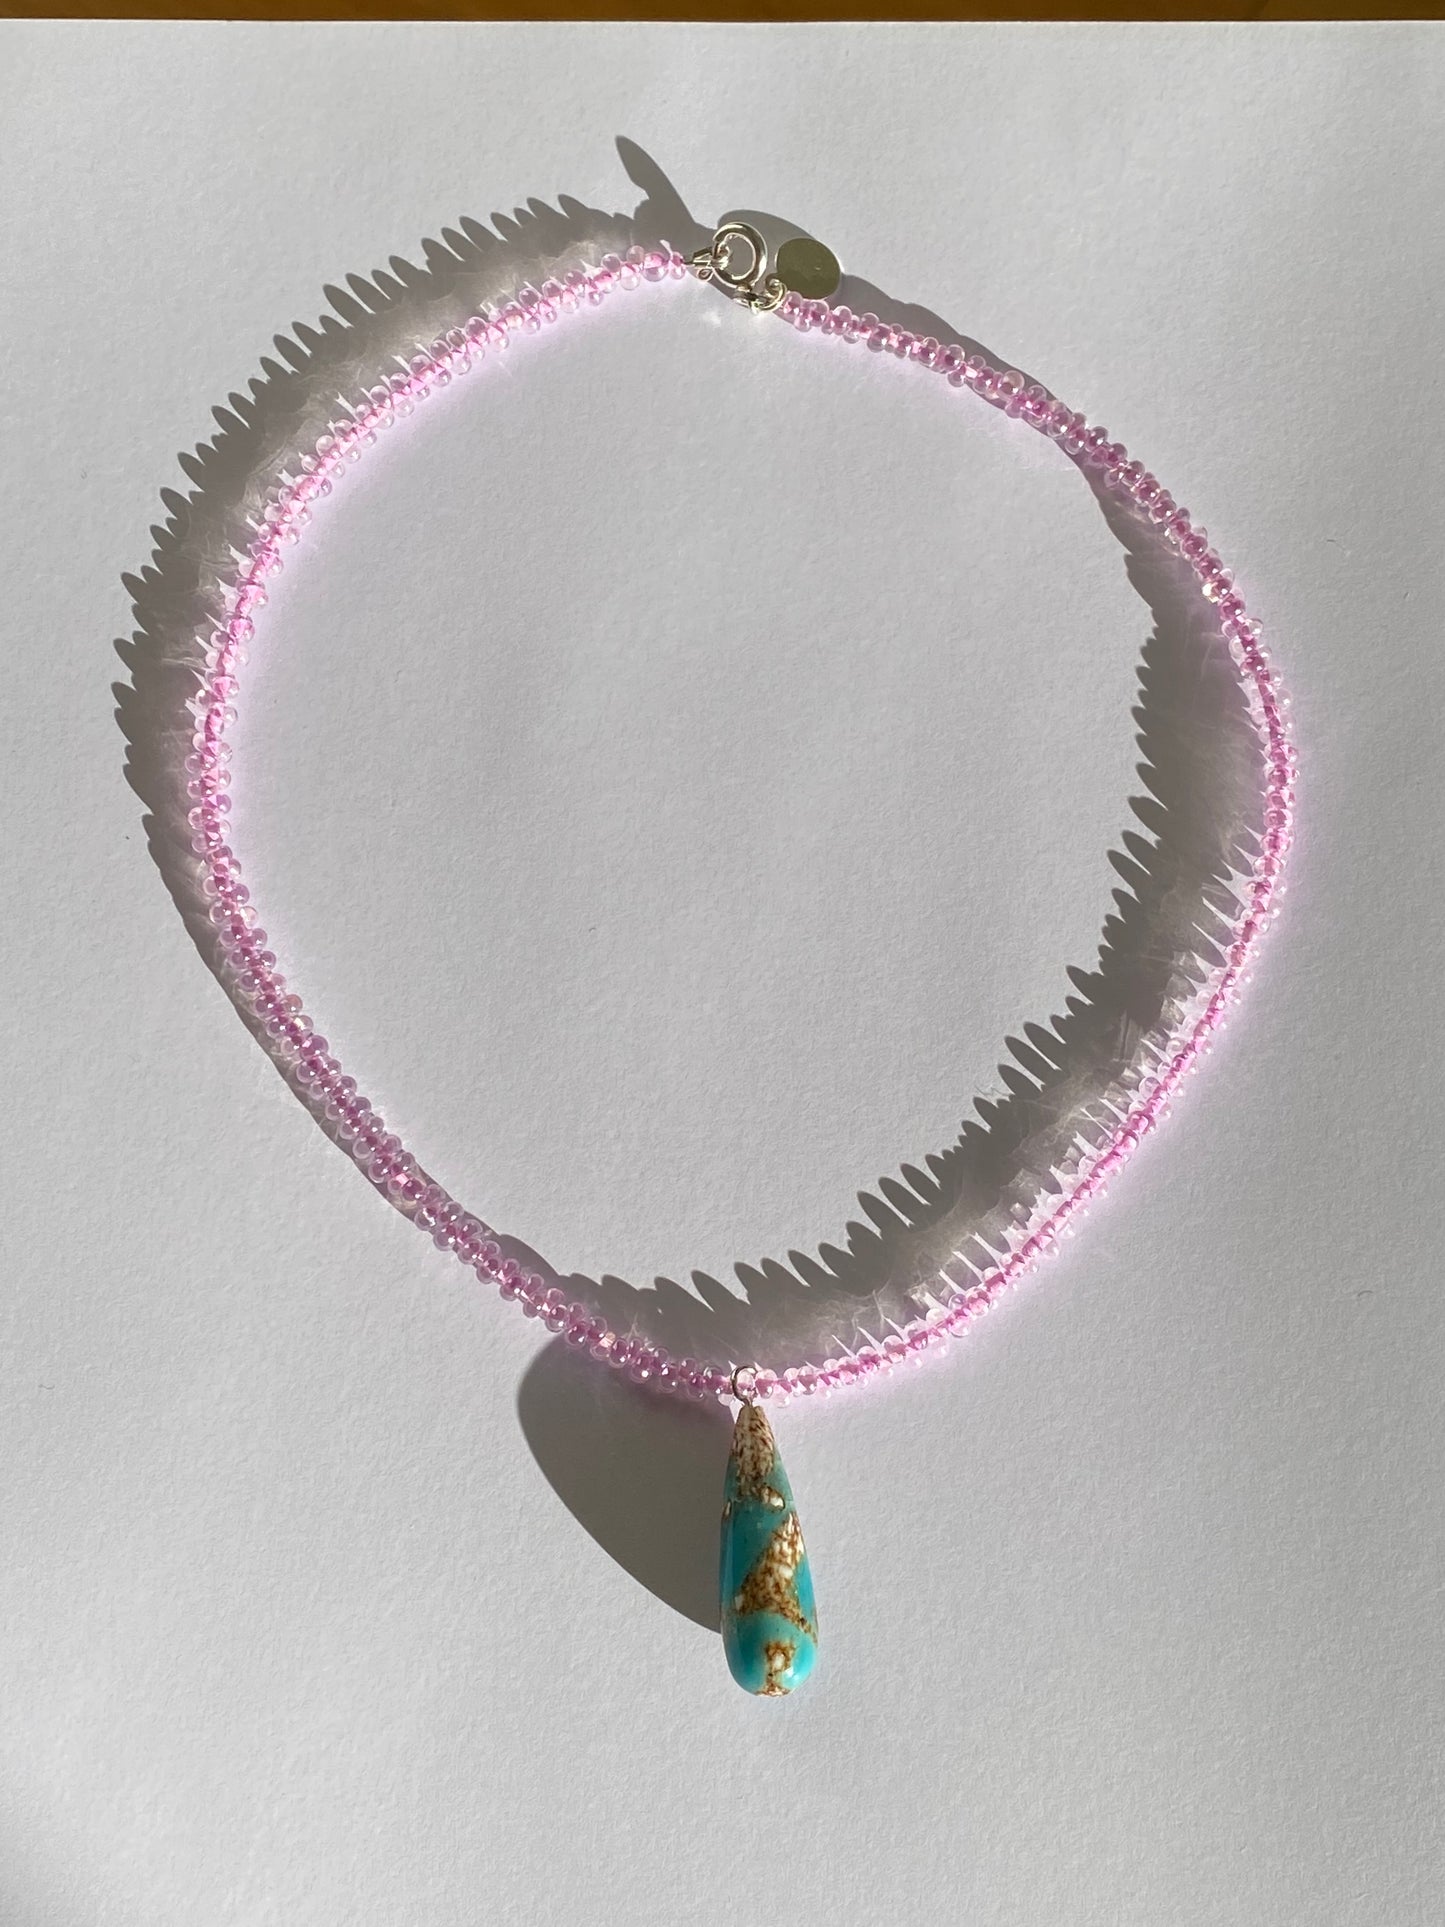 Arch necklace - Pink